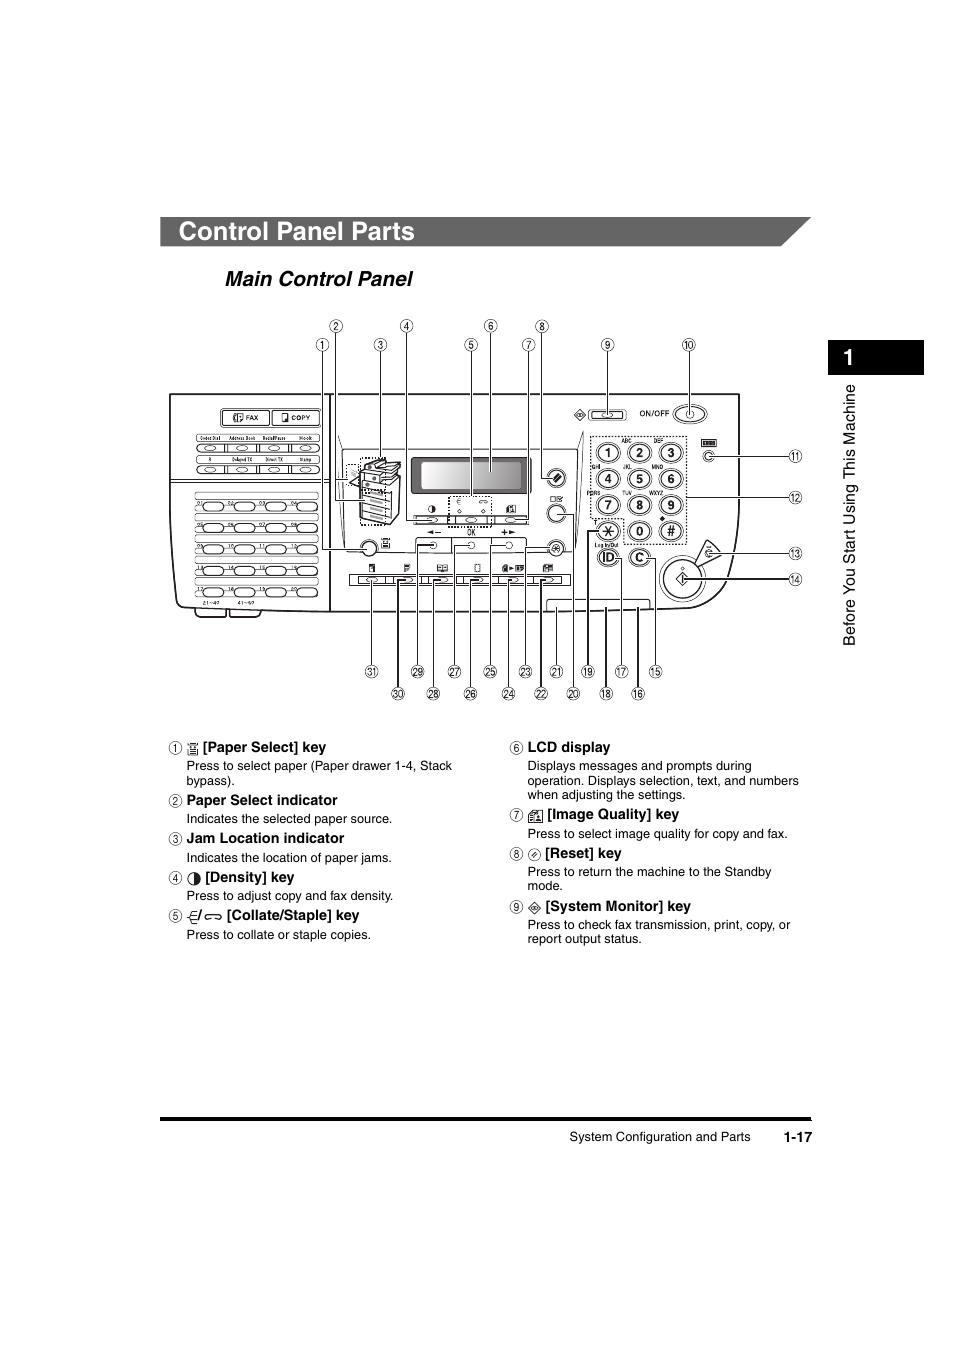 Control panel parts, Main control panel, Control panel parts -17 | Main control panel -17 | Canon iR 2016 User Manual | Page 47 / 92